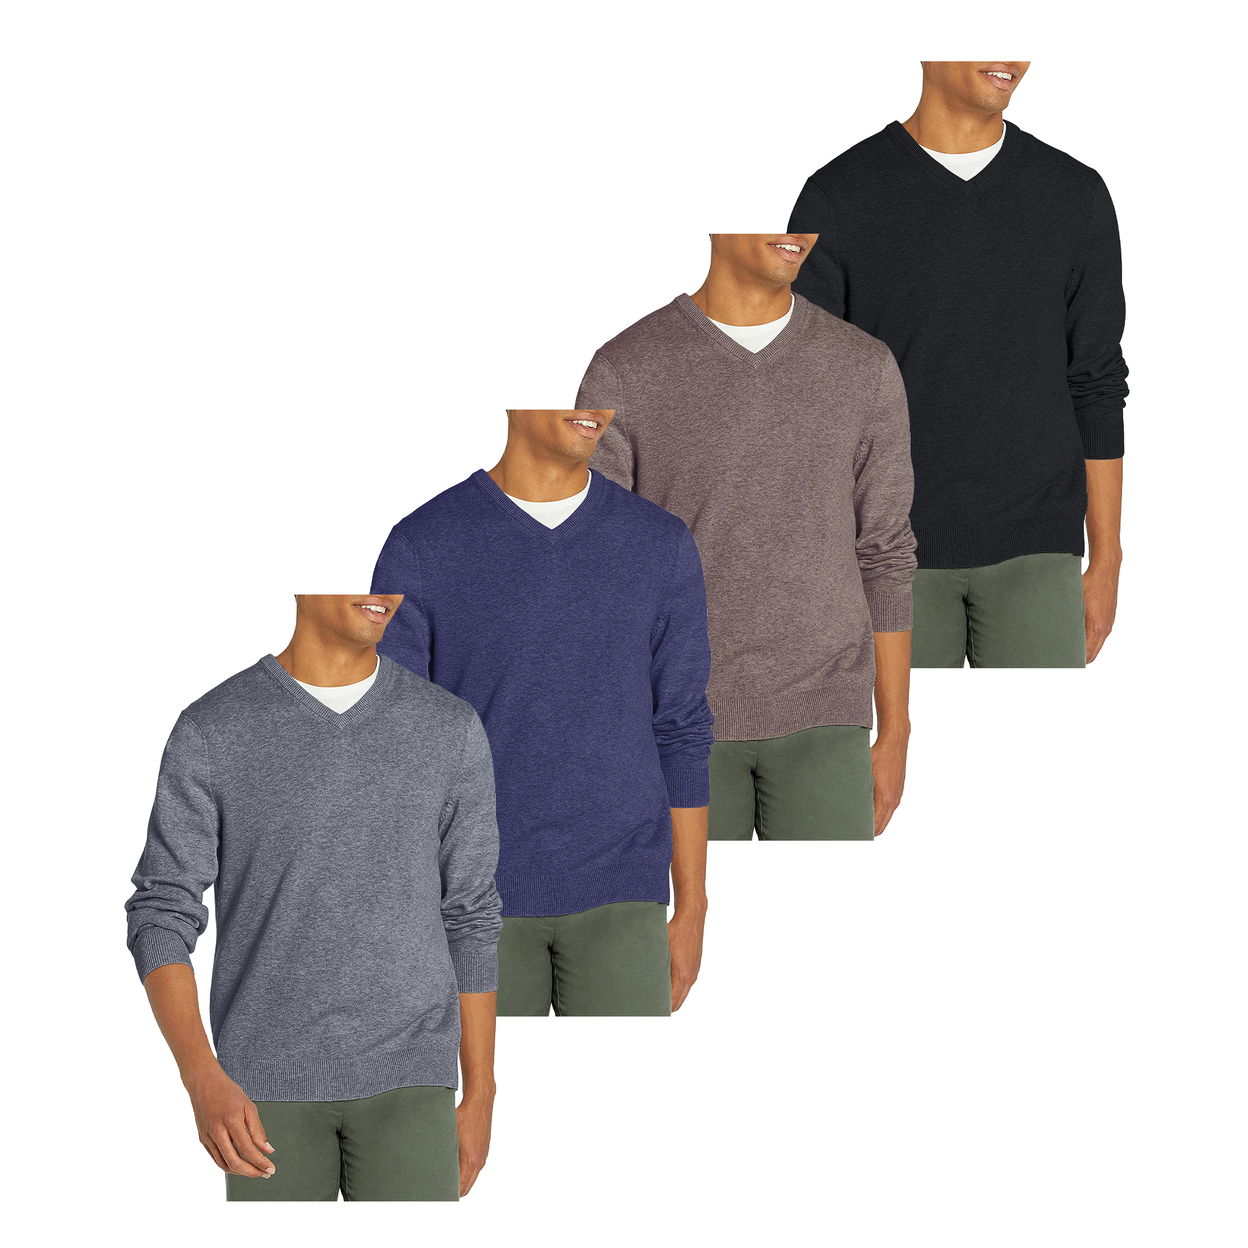 Multi-Pack: Men's Casual Ultra Soft Slim Fit Warm Knit V-Neck Sweater - 1-pack, Small